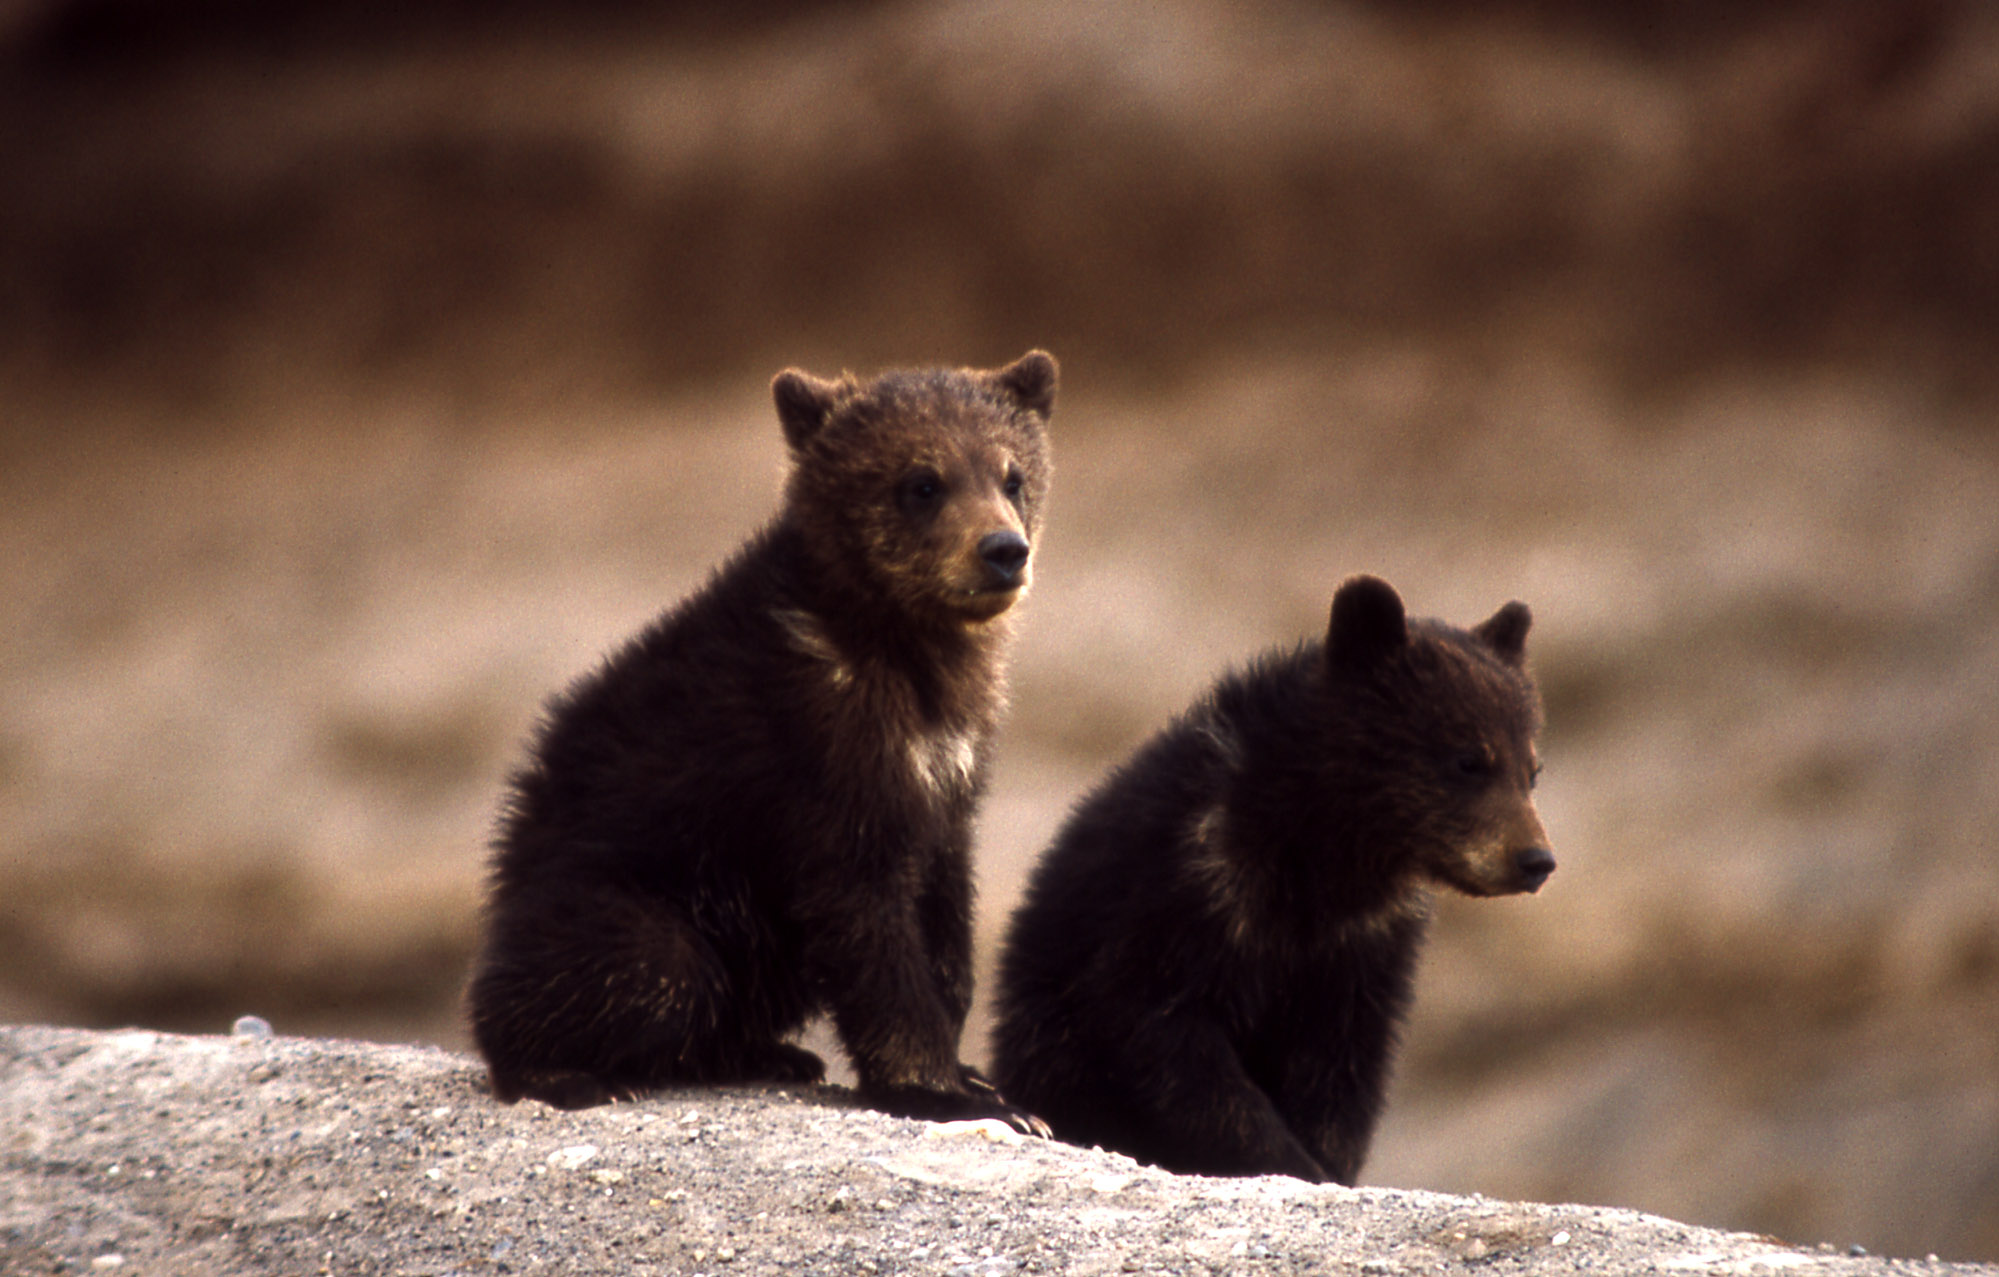 Orphan bear cubs to be trained to survive in wild 